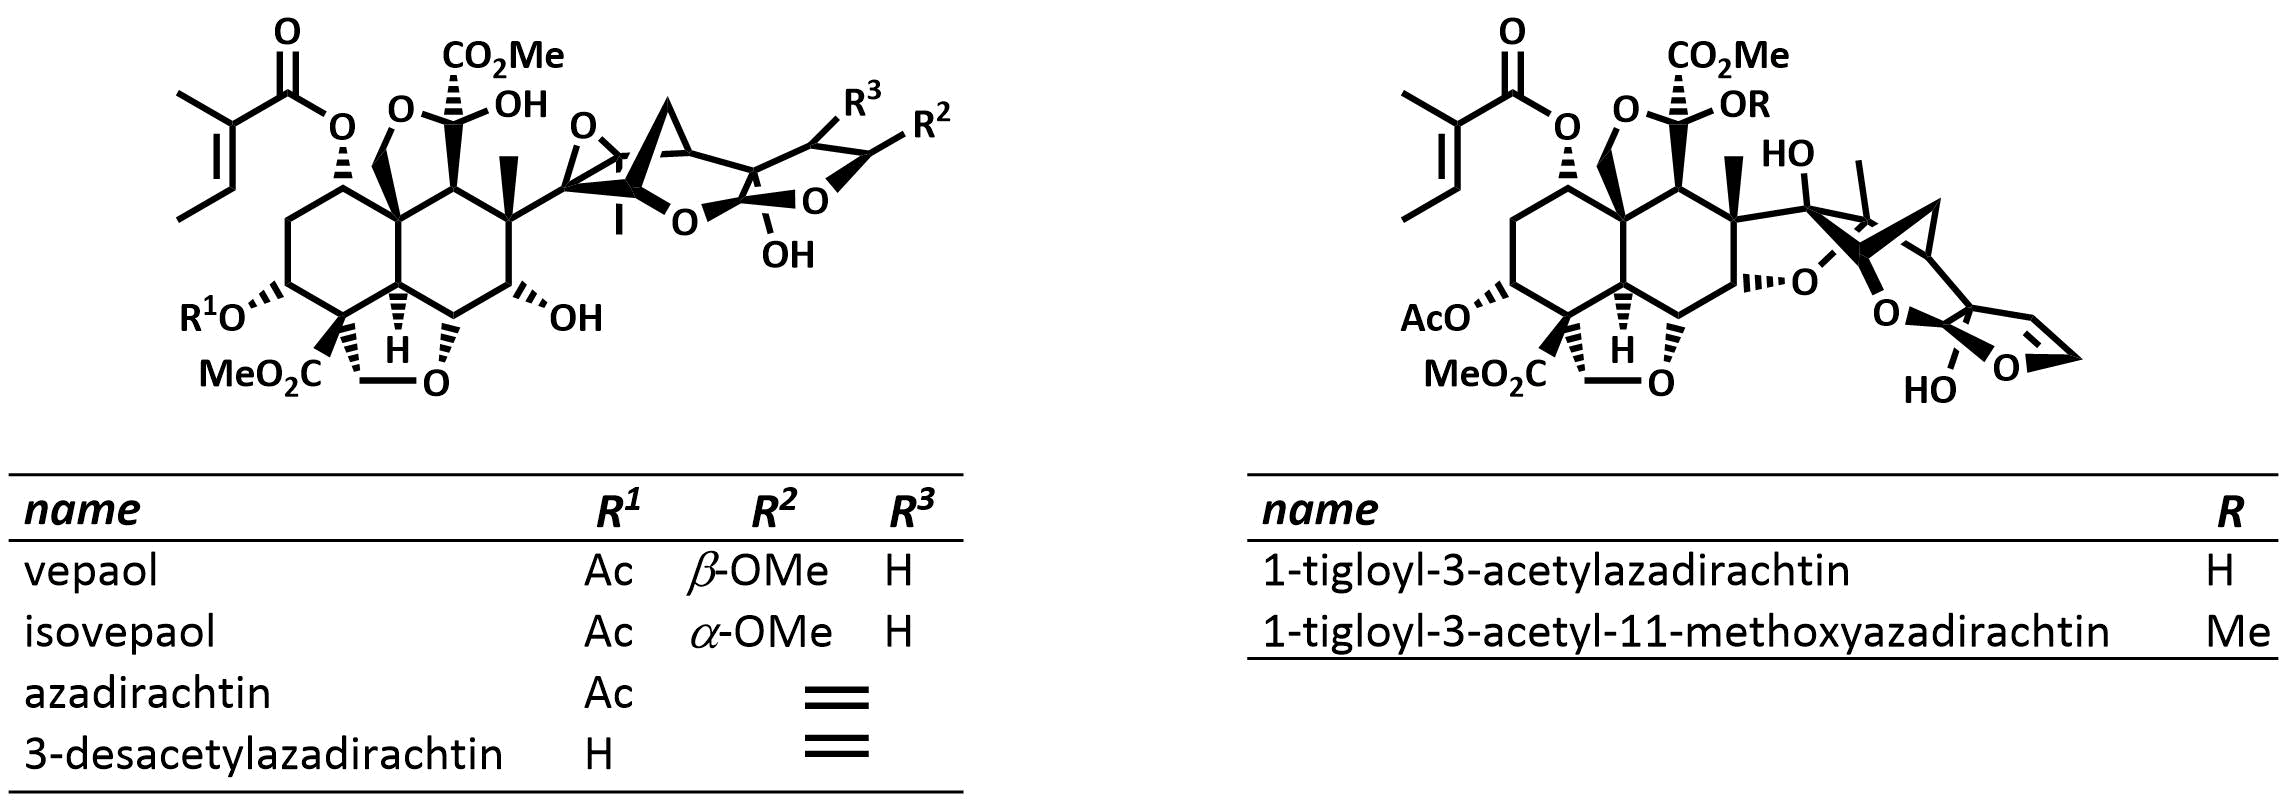 Abstract image for Synthesis of Natural Products from the Indian Neem Tree <i>Azadirachta Indica</i>